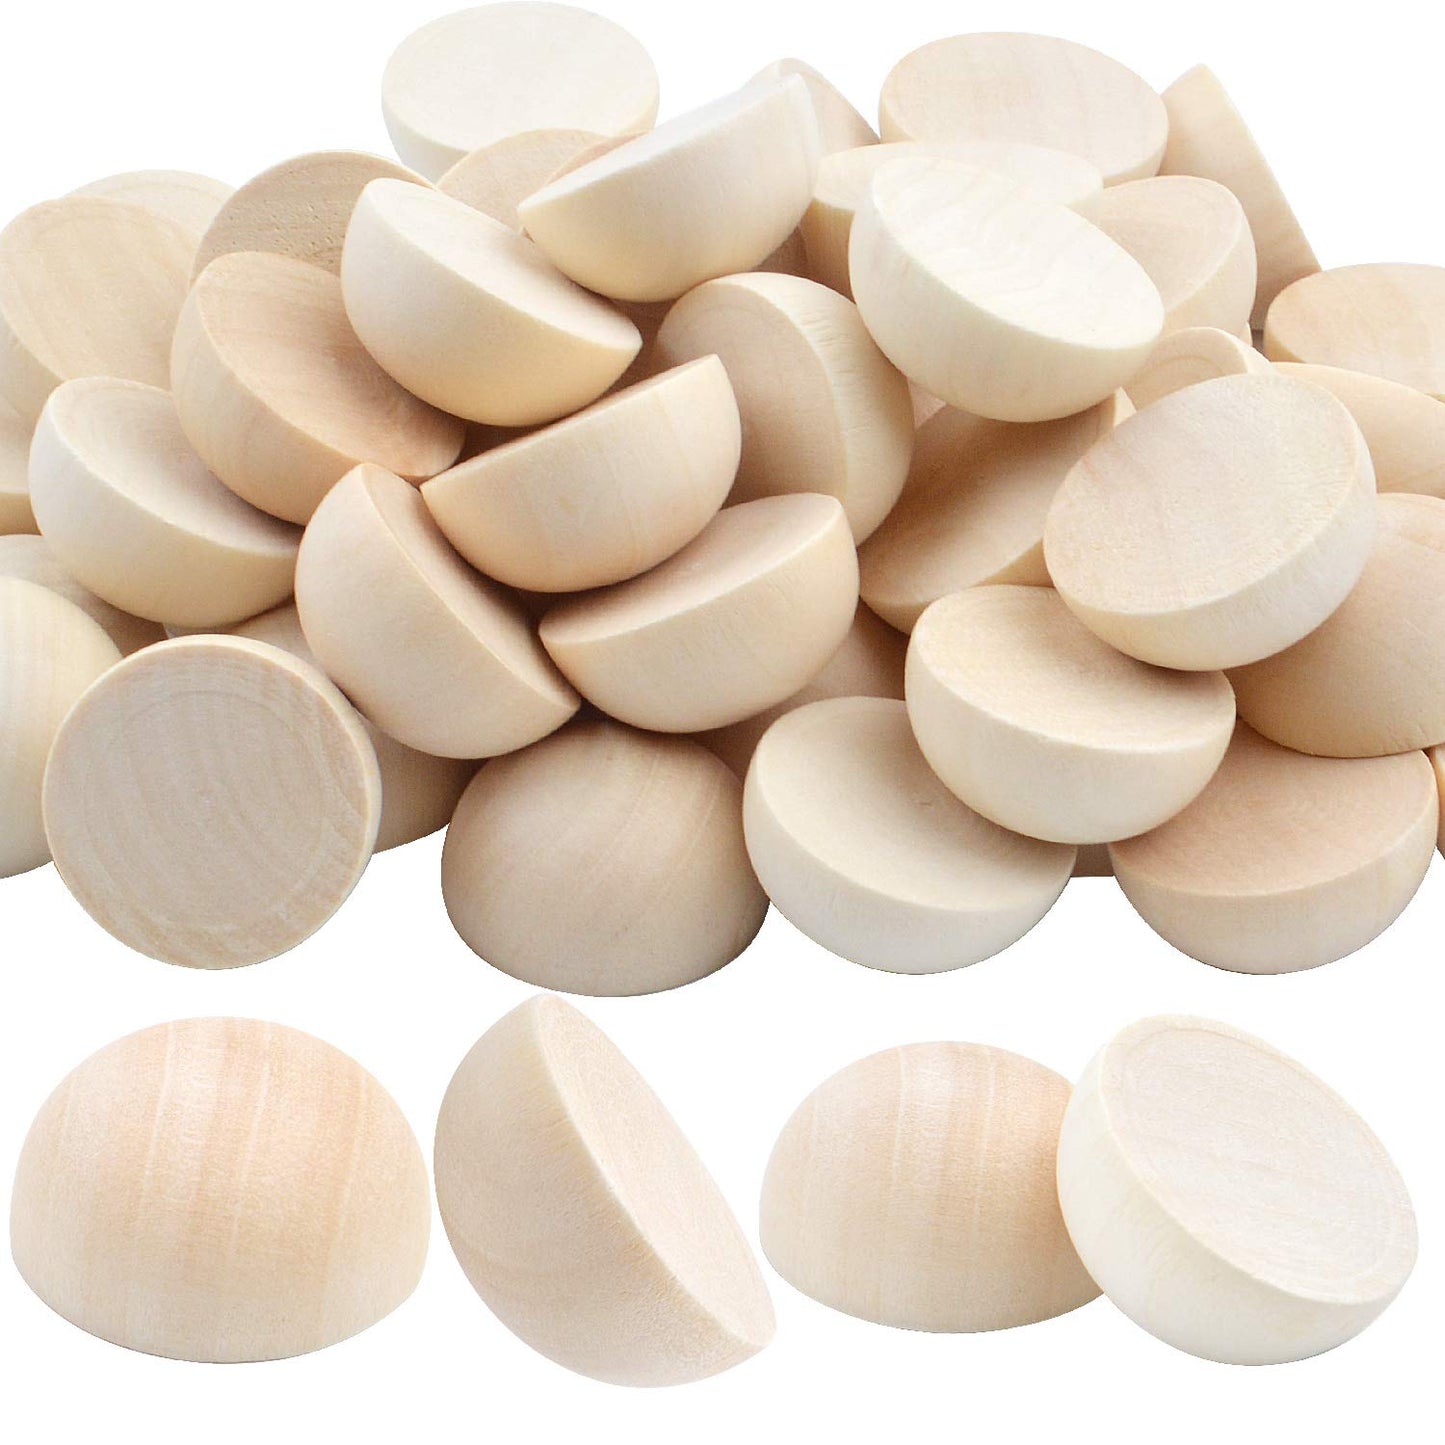 50 Pieces 25mm Natural Half Wooden Balls Decration Split Beads for DIY Projects Crafts Kids Toy